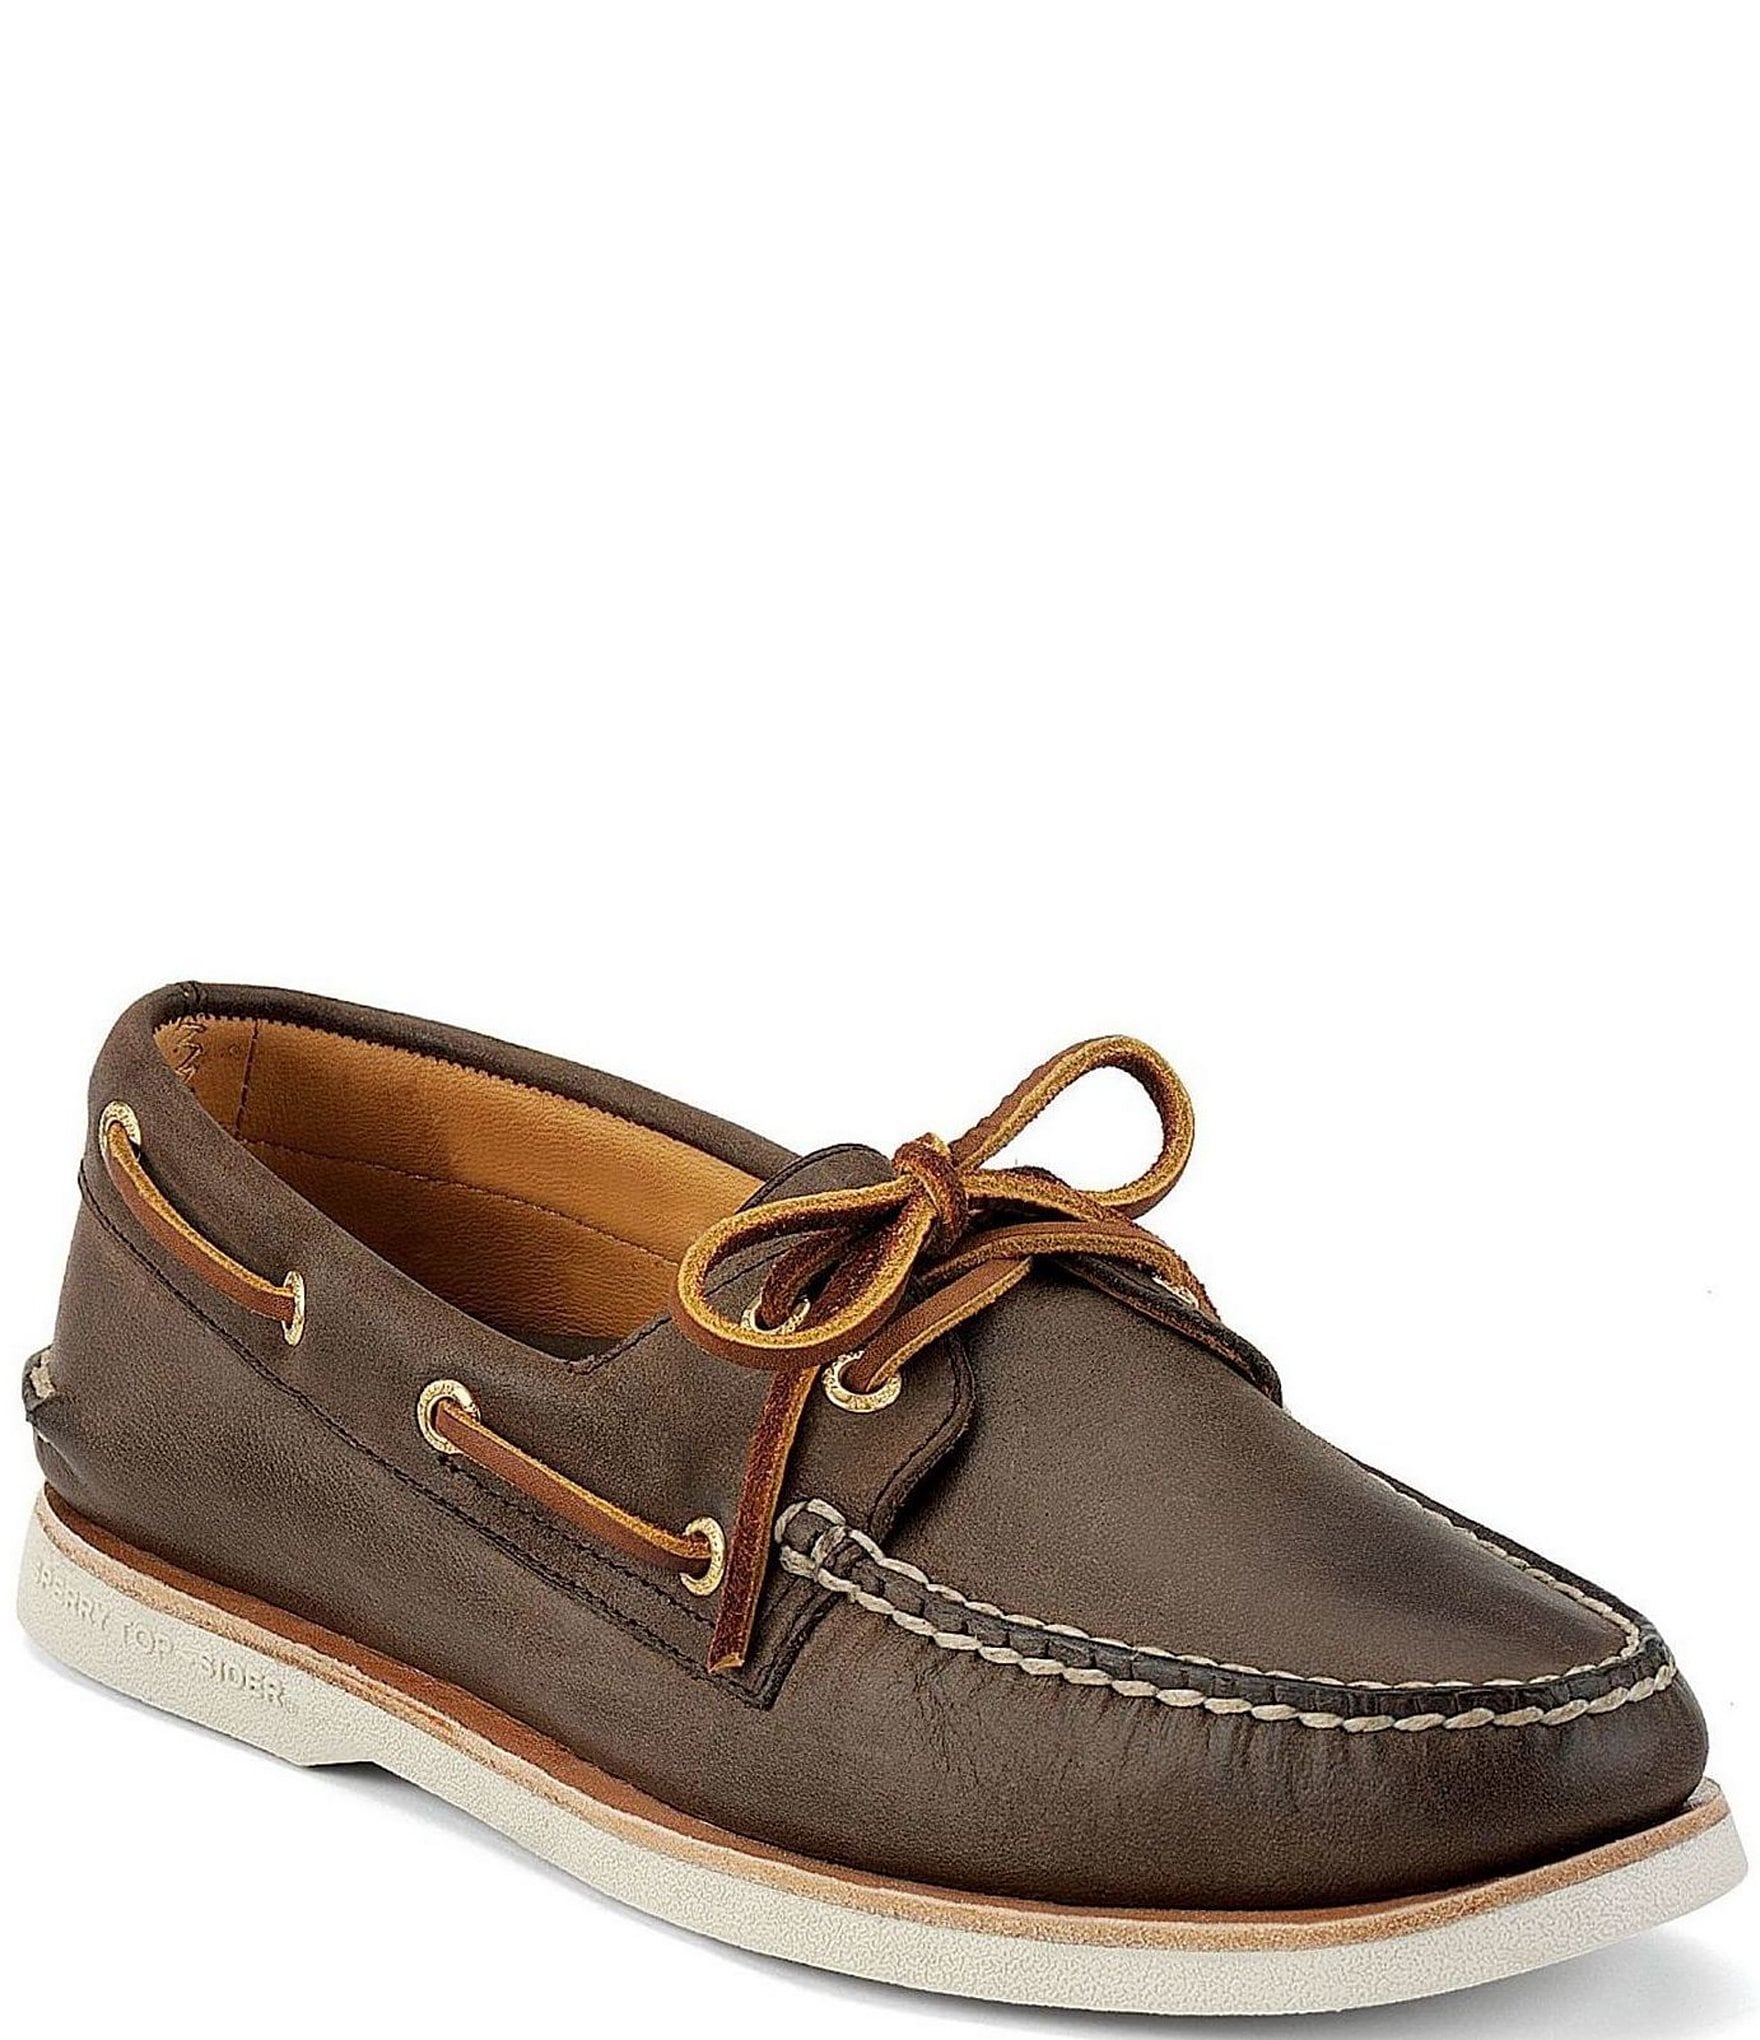 Buy > sperrys casual shoes > in stock